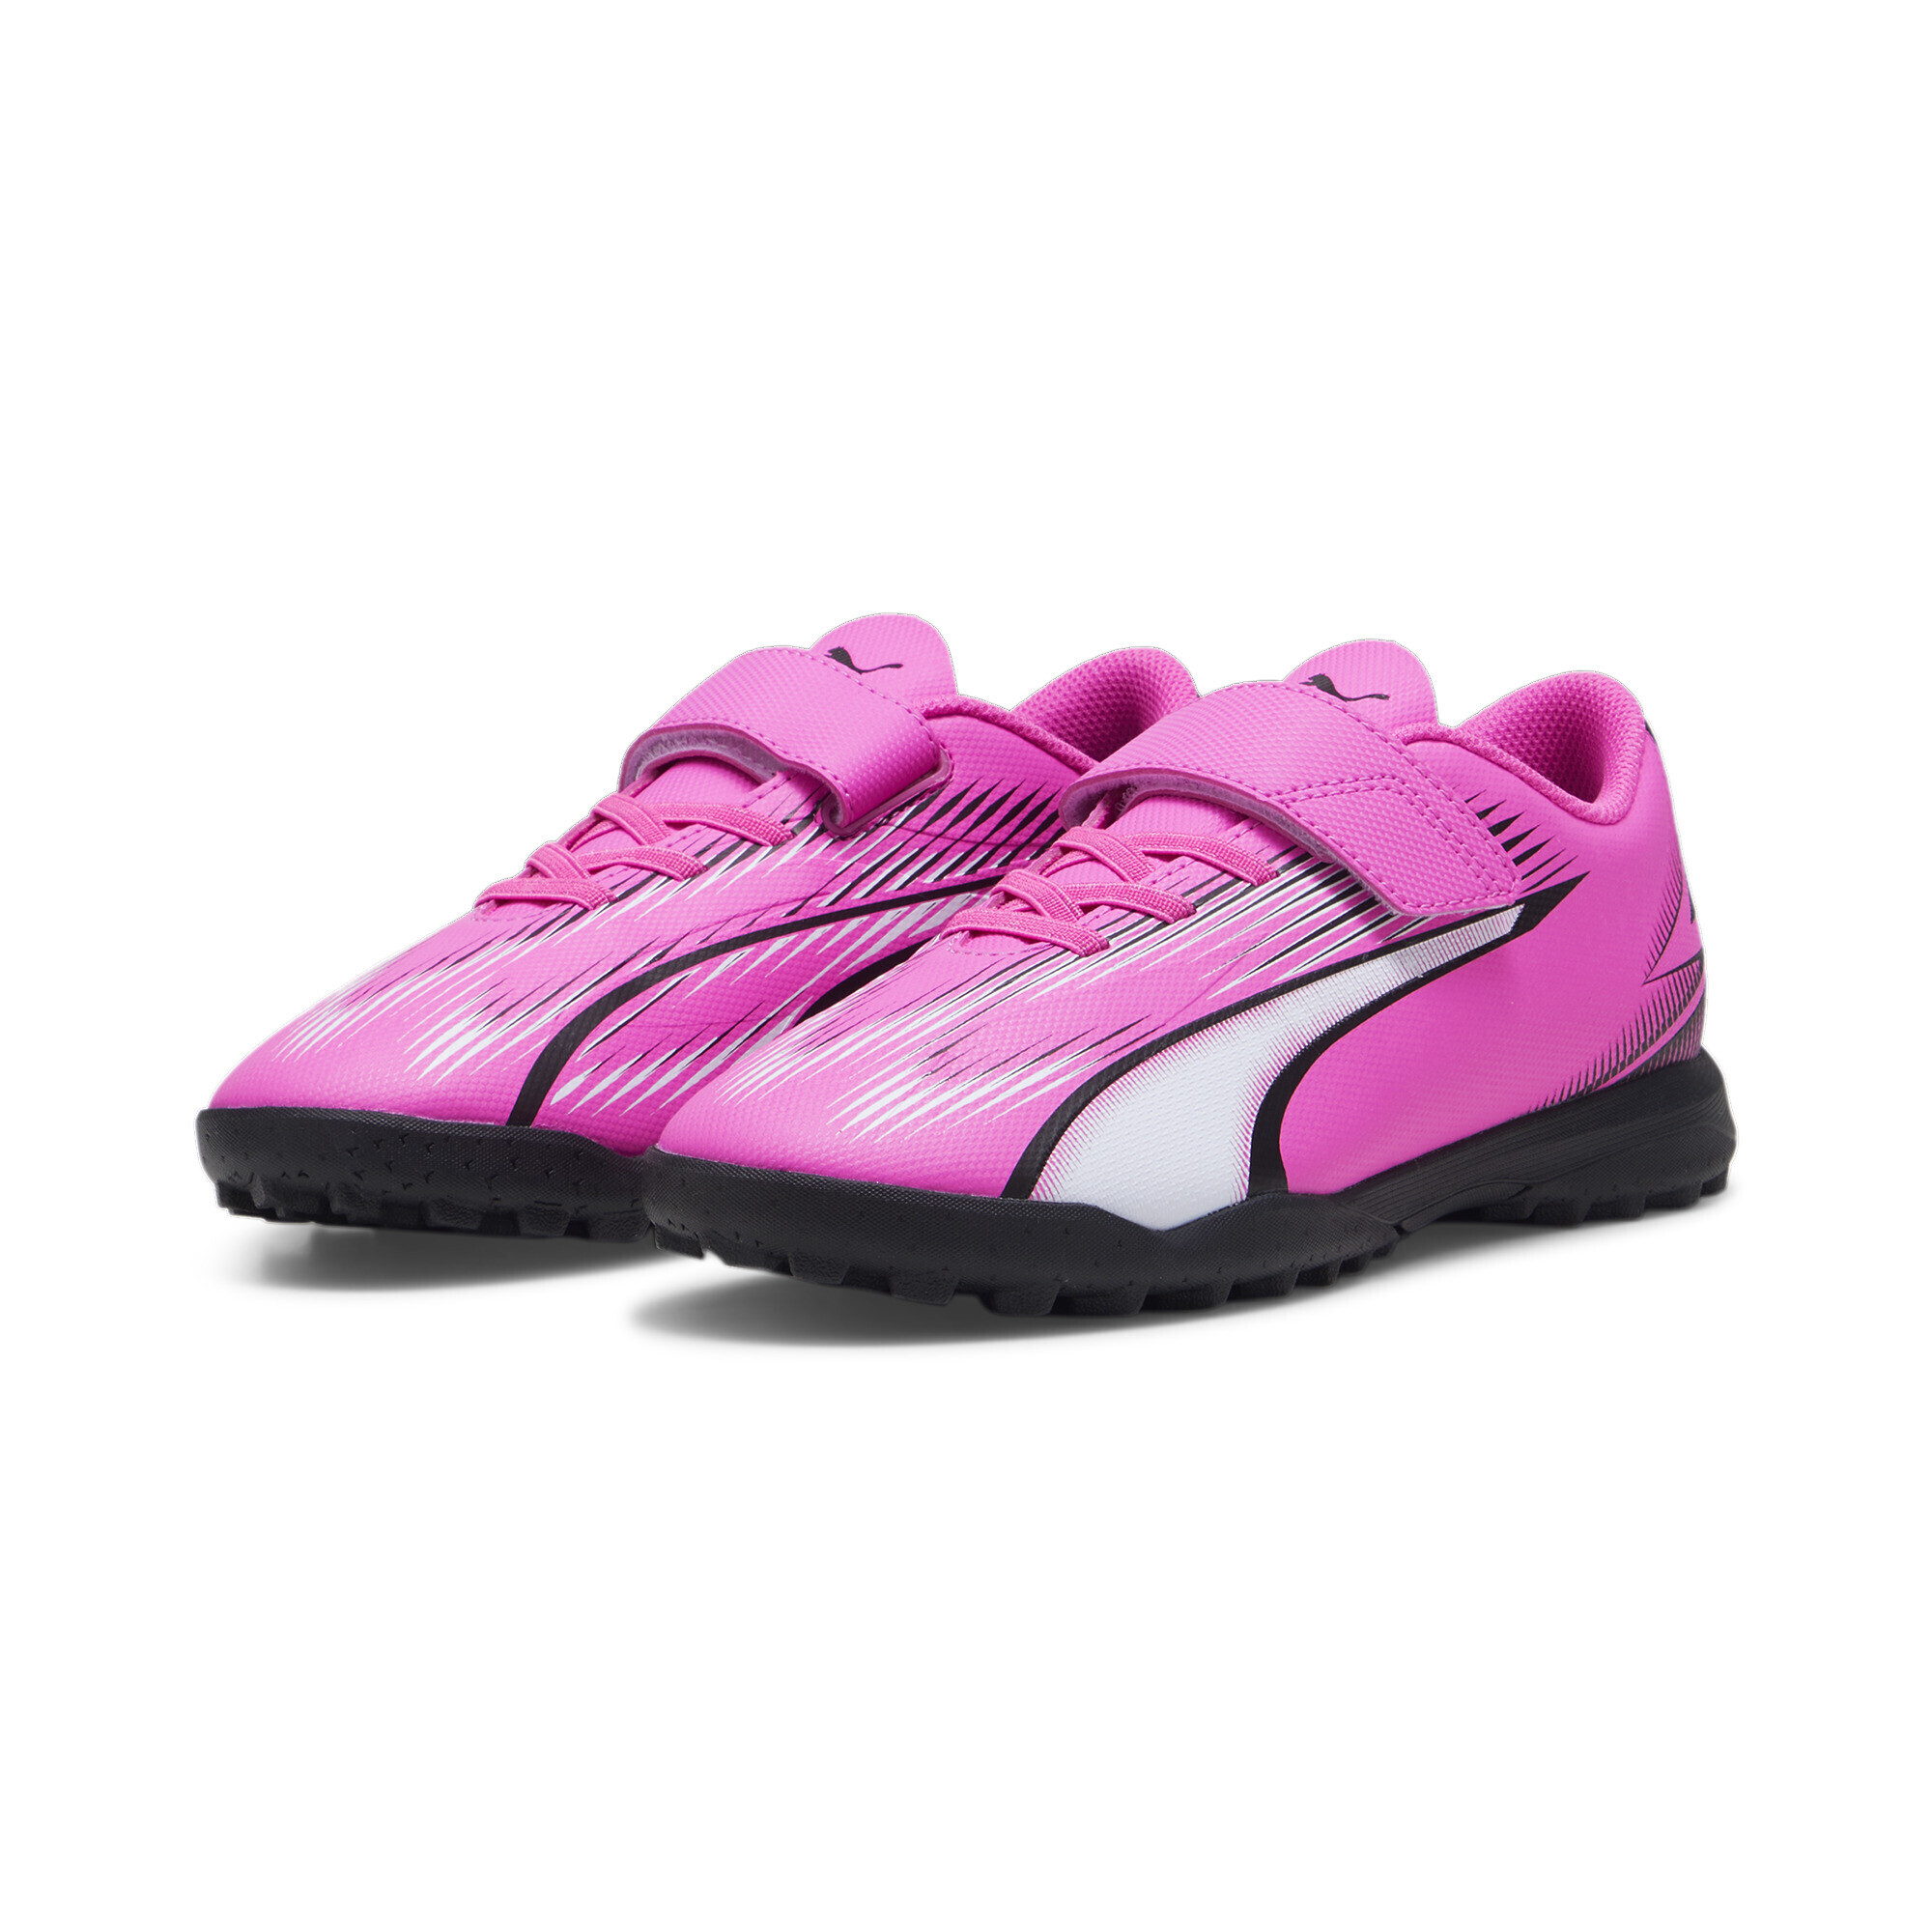 PUMA ULTRA PLAY TT Youth Football Boots In Pink, Size EU 30